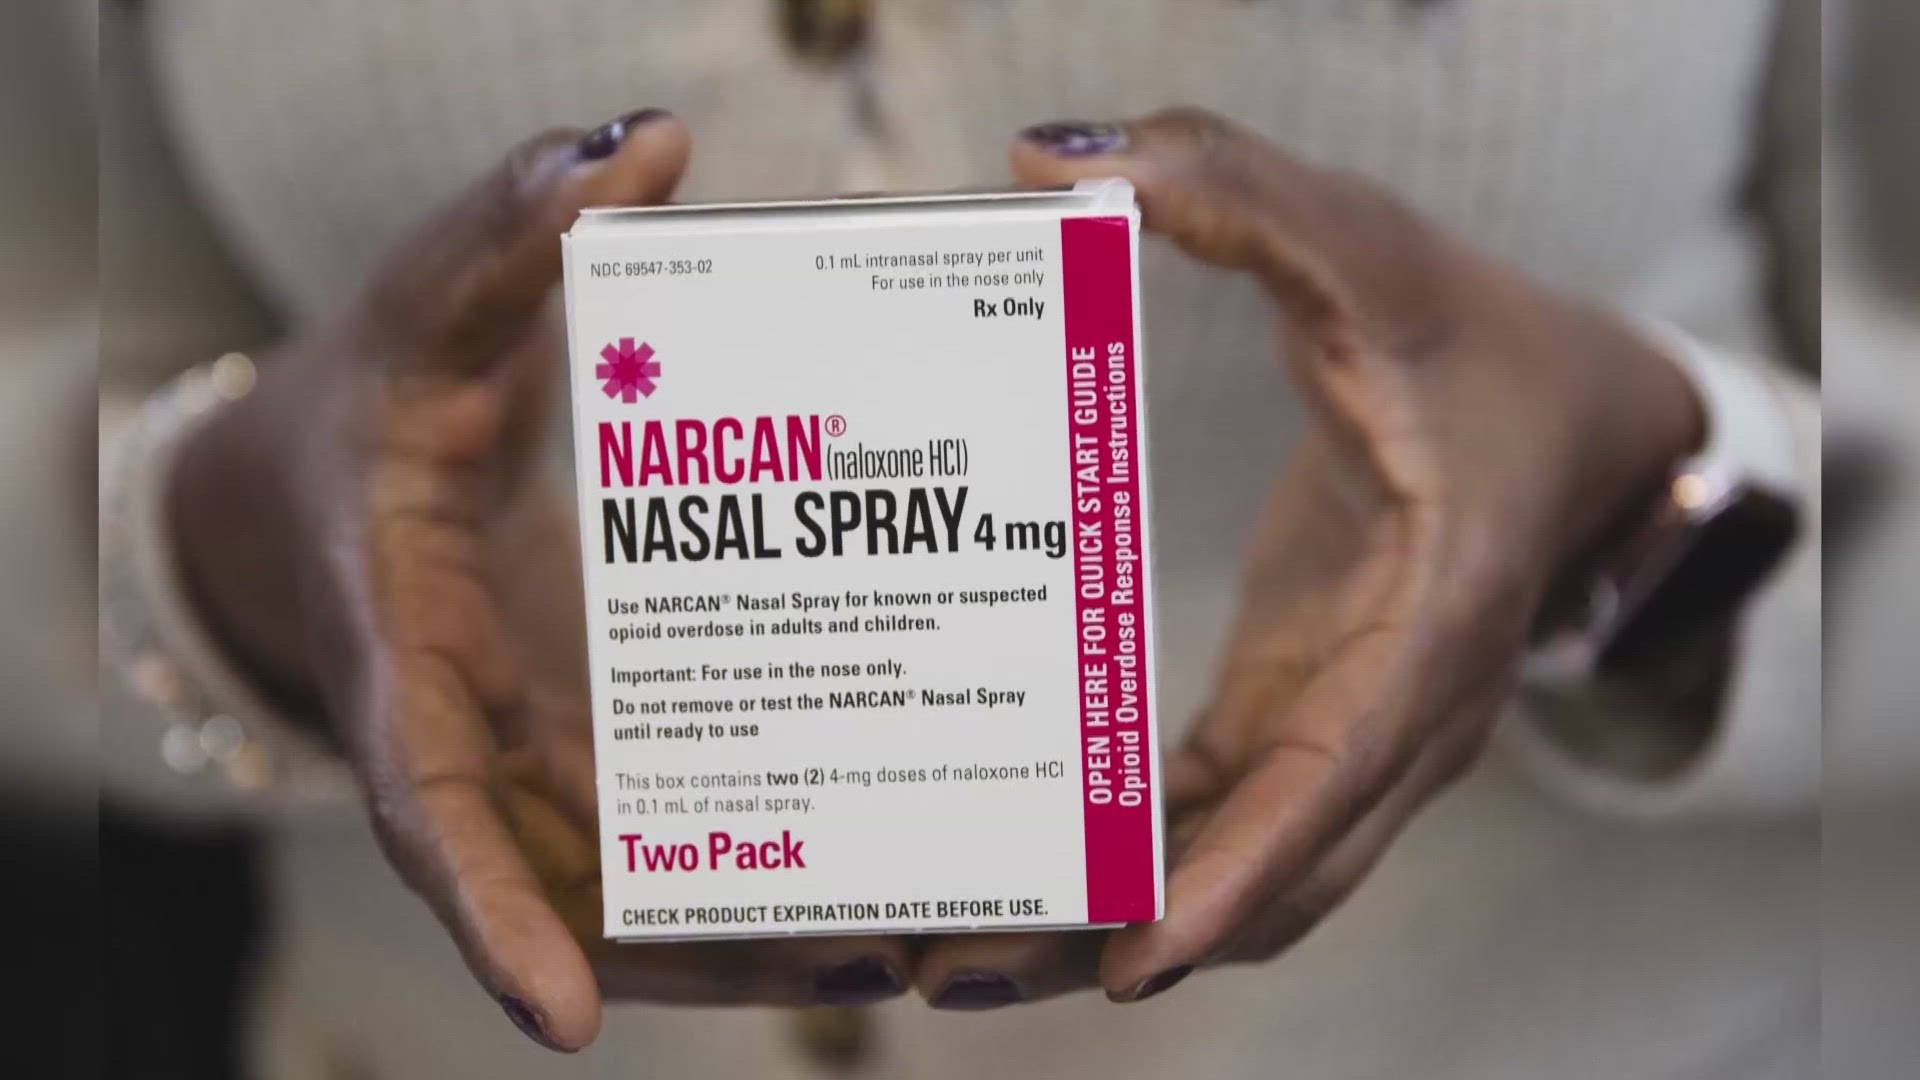 Naloxone or Narcan is an over-the-counter drug. You can find it at local stores with pharmacies like Target, Rite Aid, and Walgreens for about $45.